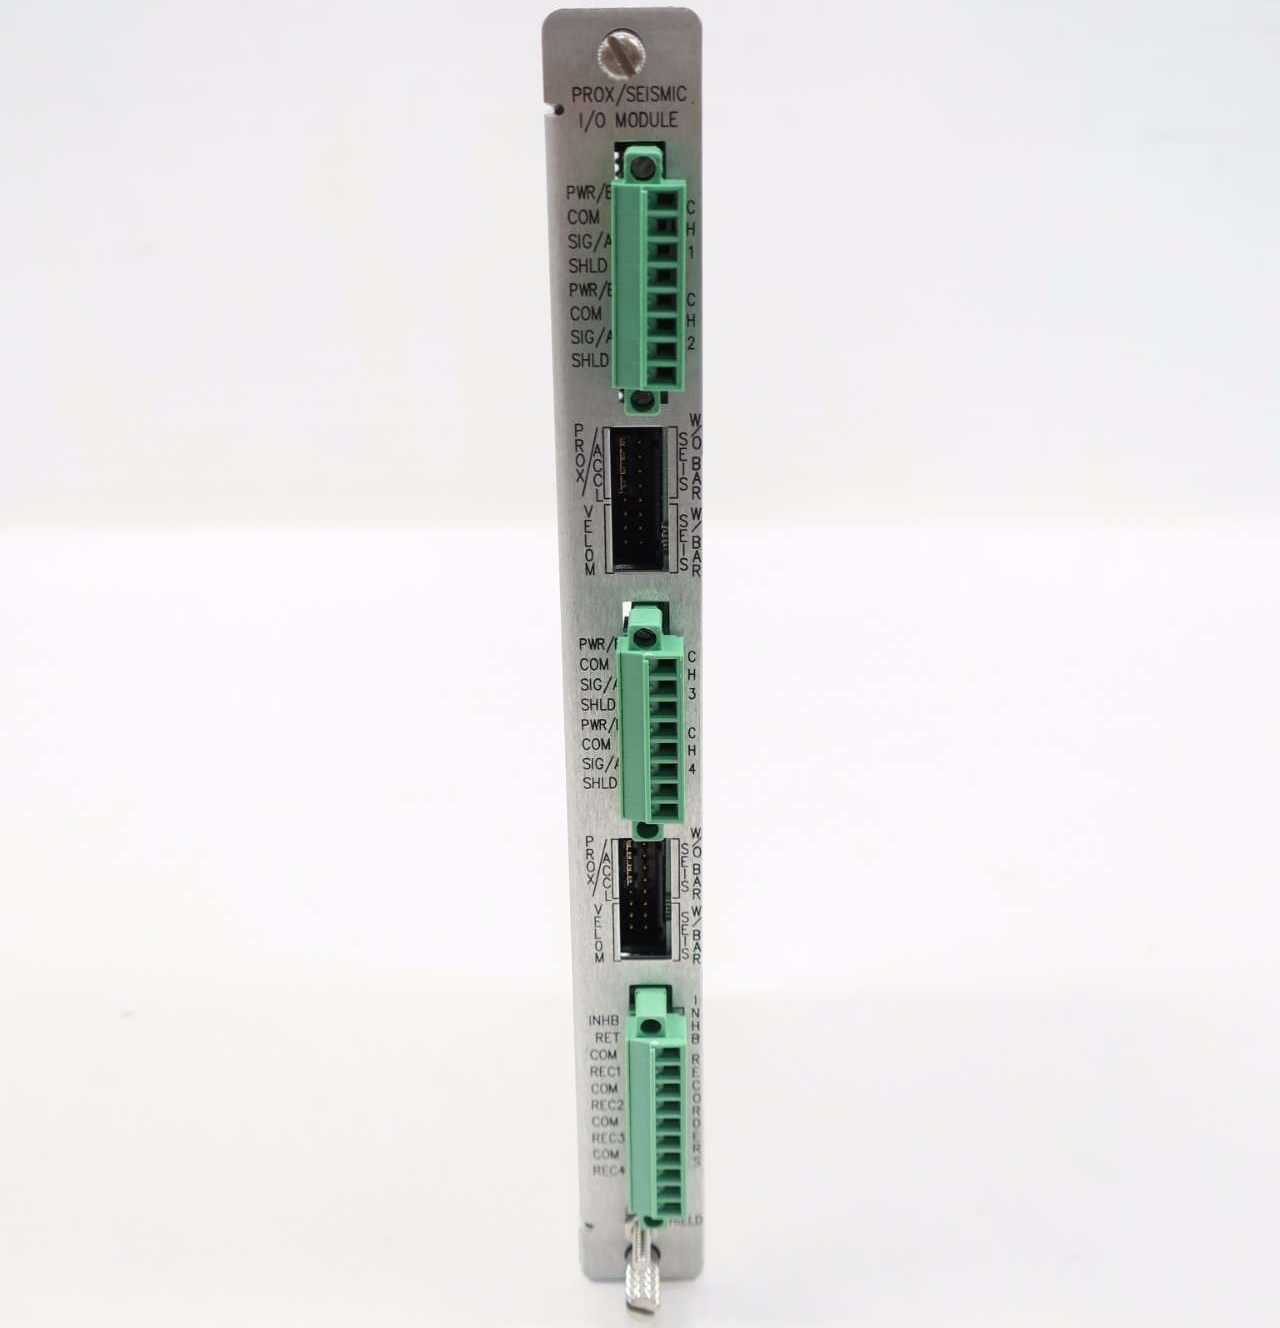 Prox/Seismic I/O Module with Internal Terminations. Part Number: PN# 128229-01  CST-128229-01